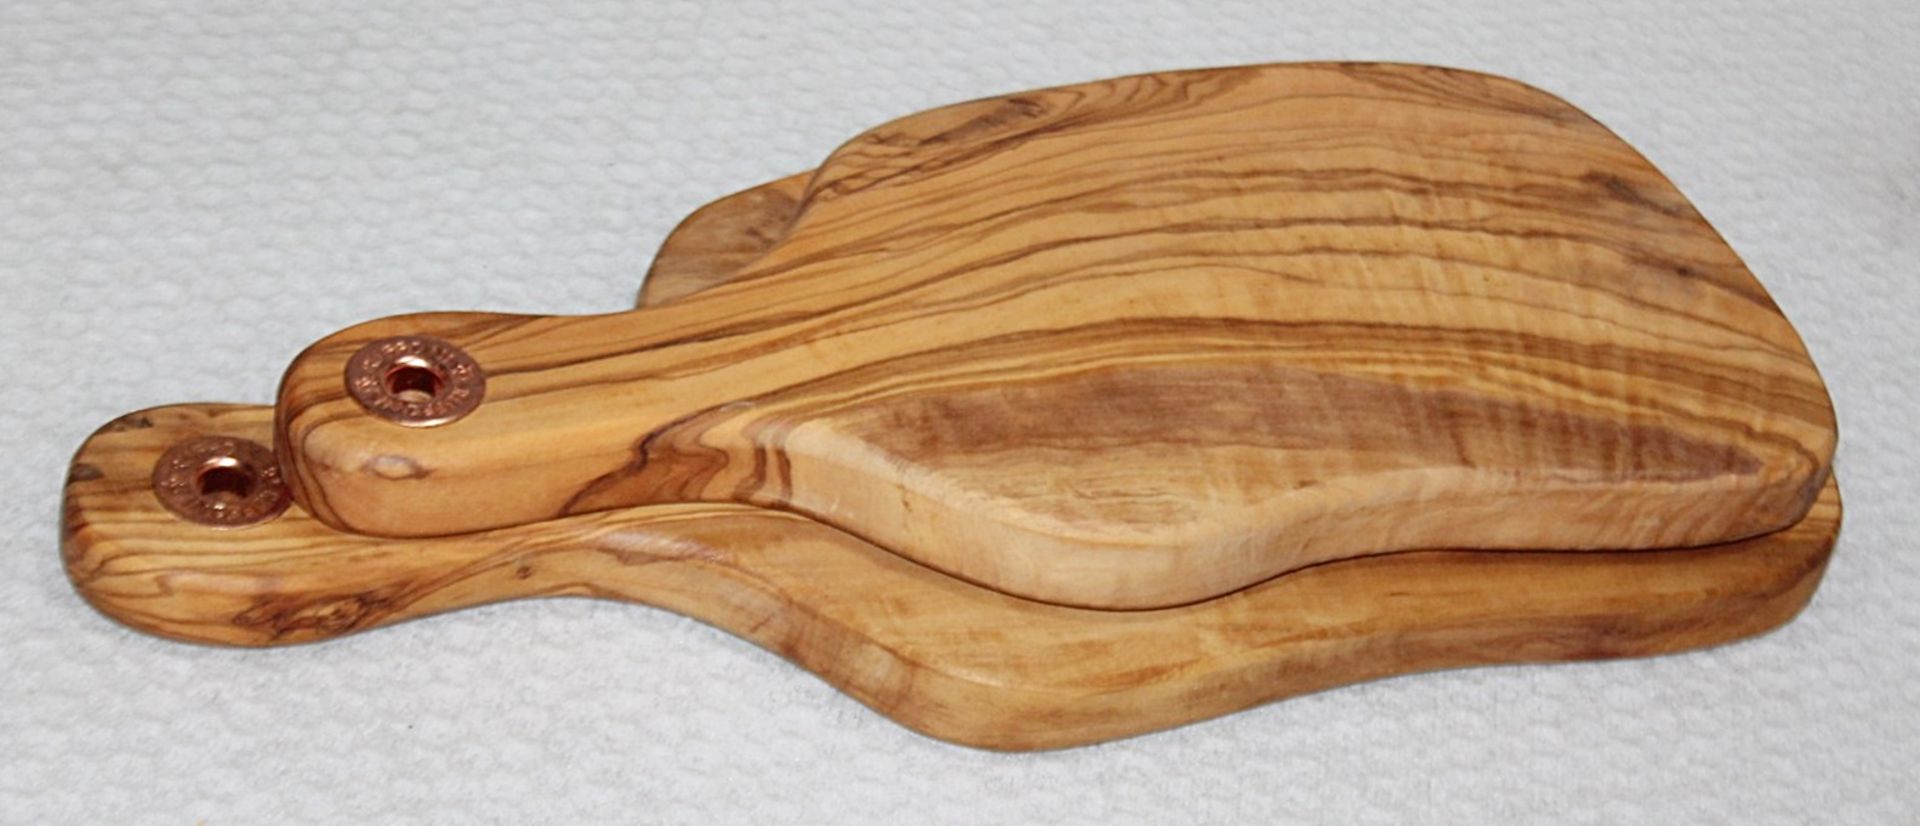 Set of 2 x RUFFONI Luxury Olivewood Chopping Boards - Made In Italy - Original Price £100.00 - Image 5 of 5